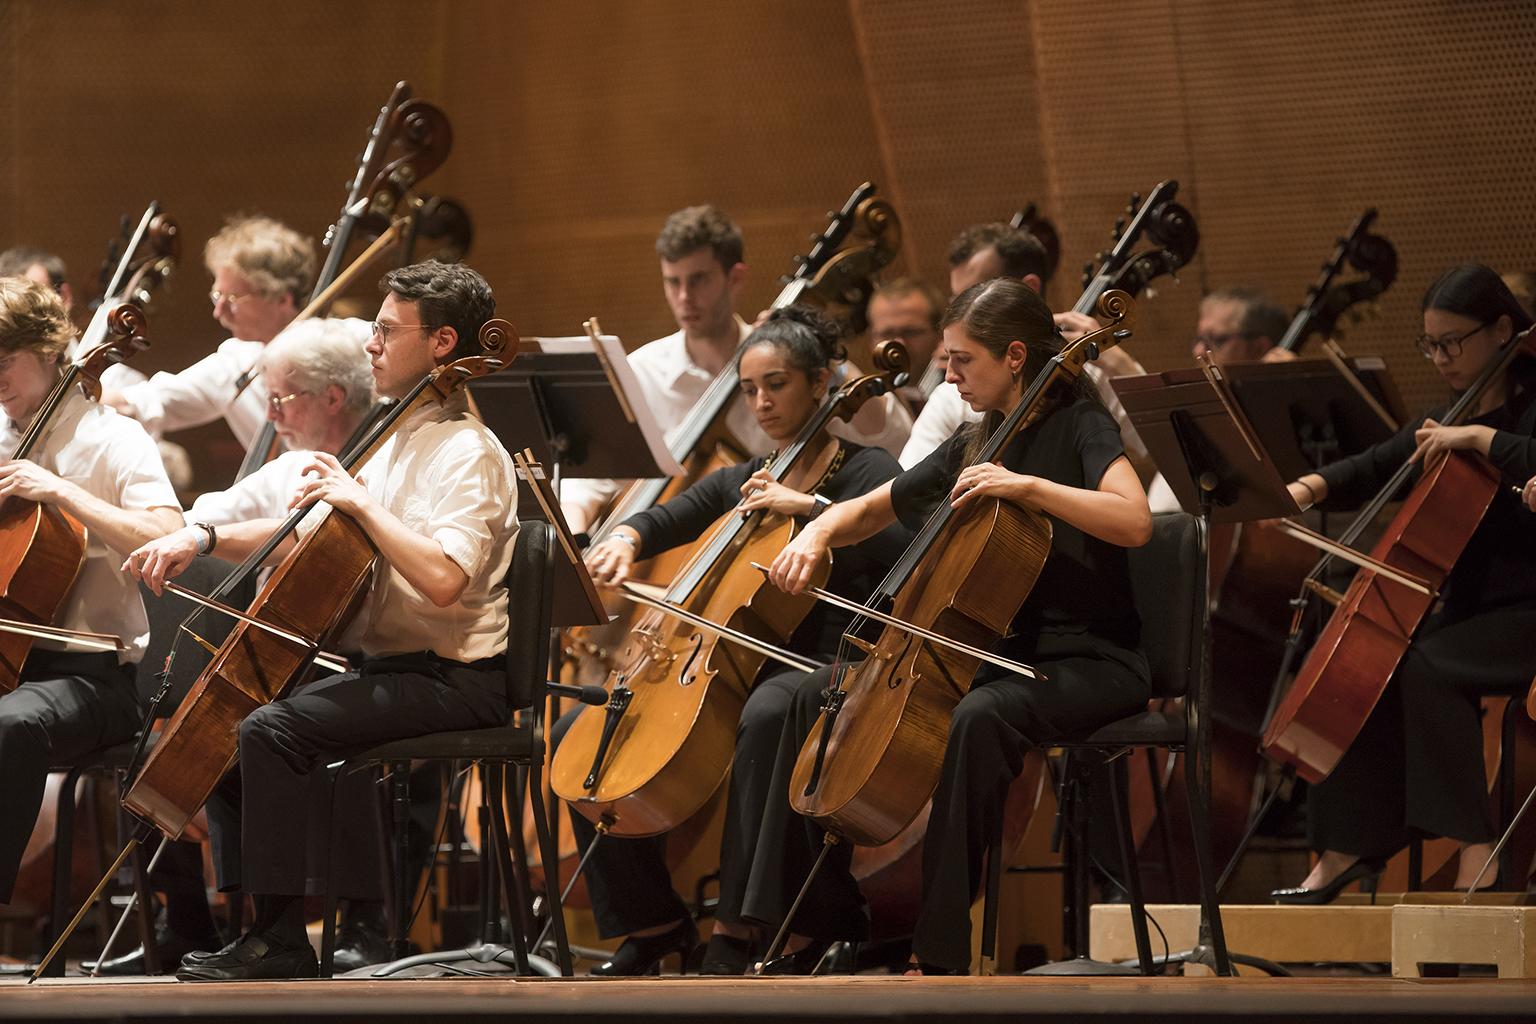 This special side-by-side concert launched the centennial season of the Civic Orchestra of Chicago, which was founded by the CSO’s second music director, Frederick Stock. (Photo credit: Todd Rosenberg)